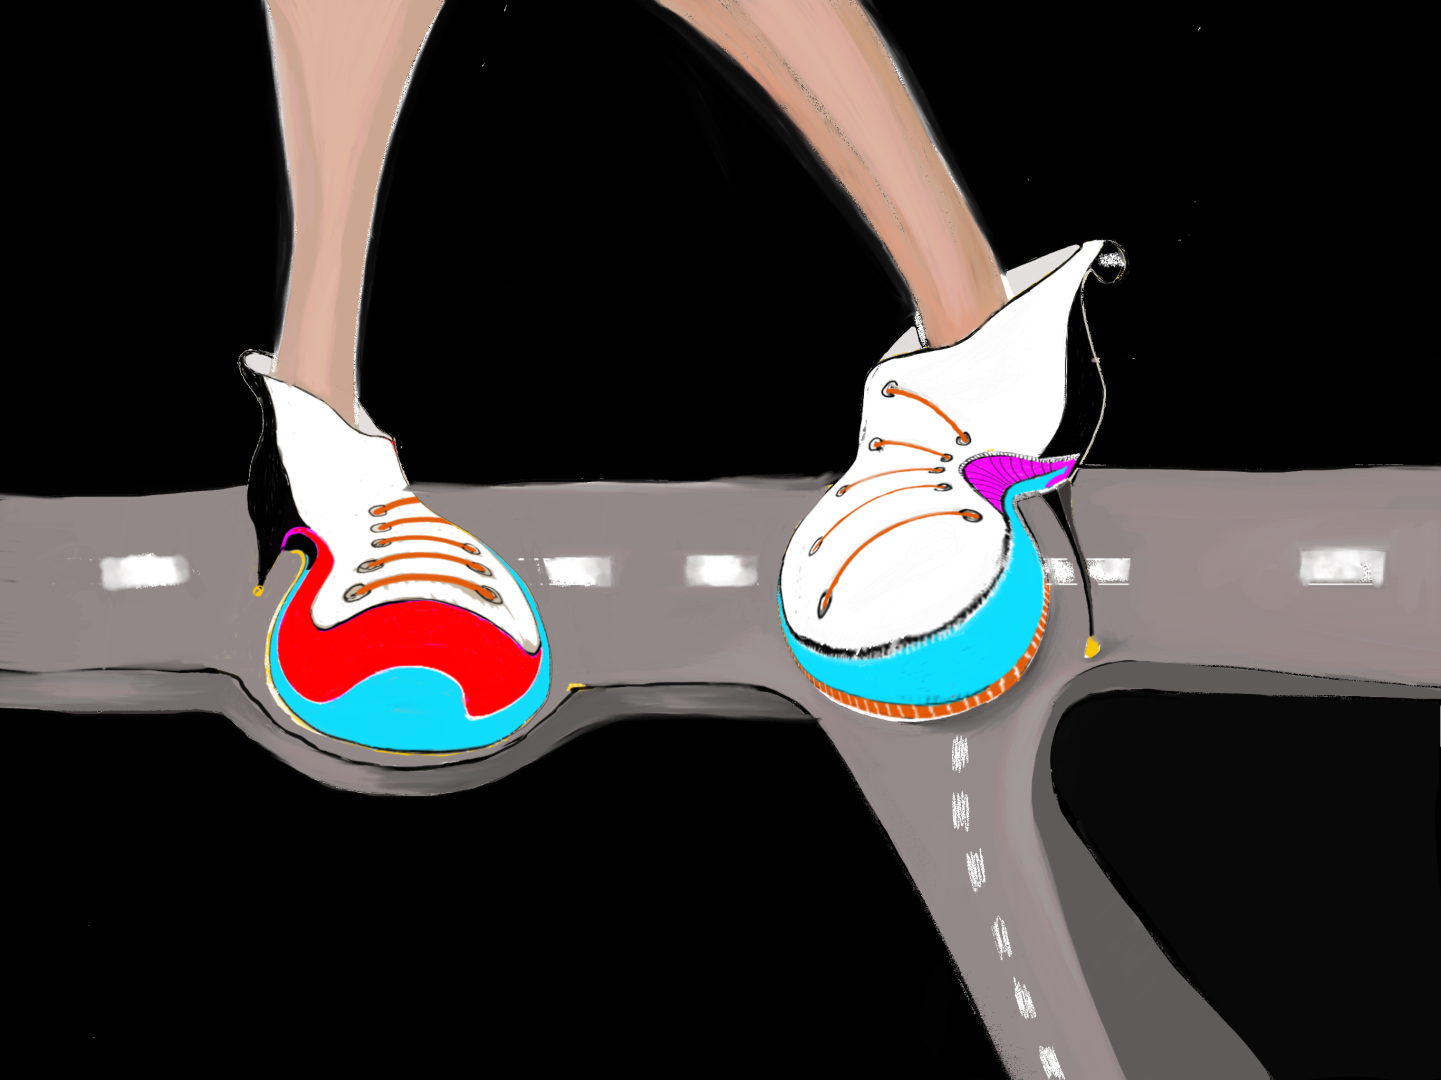 An illustrations of athletic shoes on a road. One of the shoes appears to have a stiletto heal. Artwork by Haisam Al Saiegh